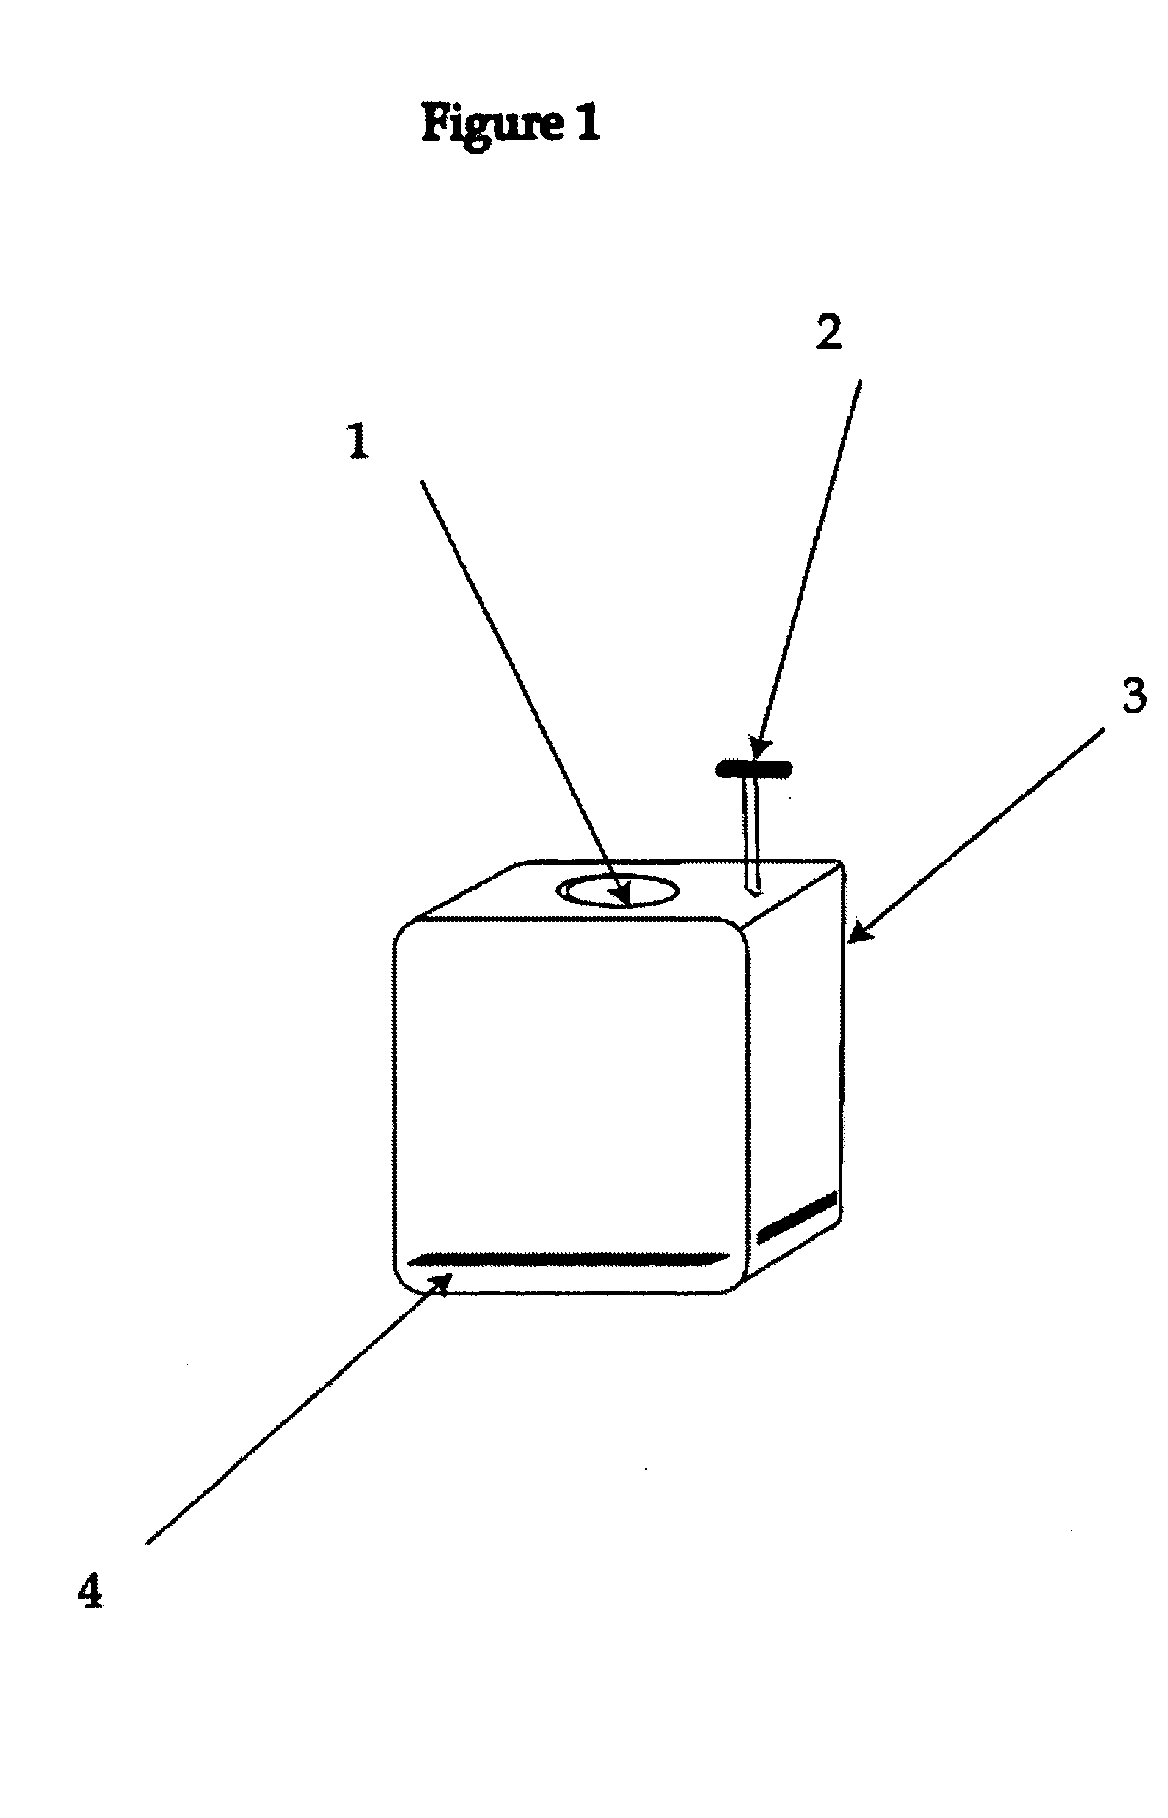 Method and apparatus for heating sterile solutions during medical procedures